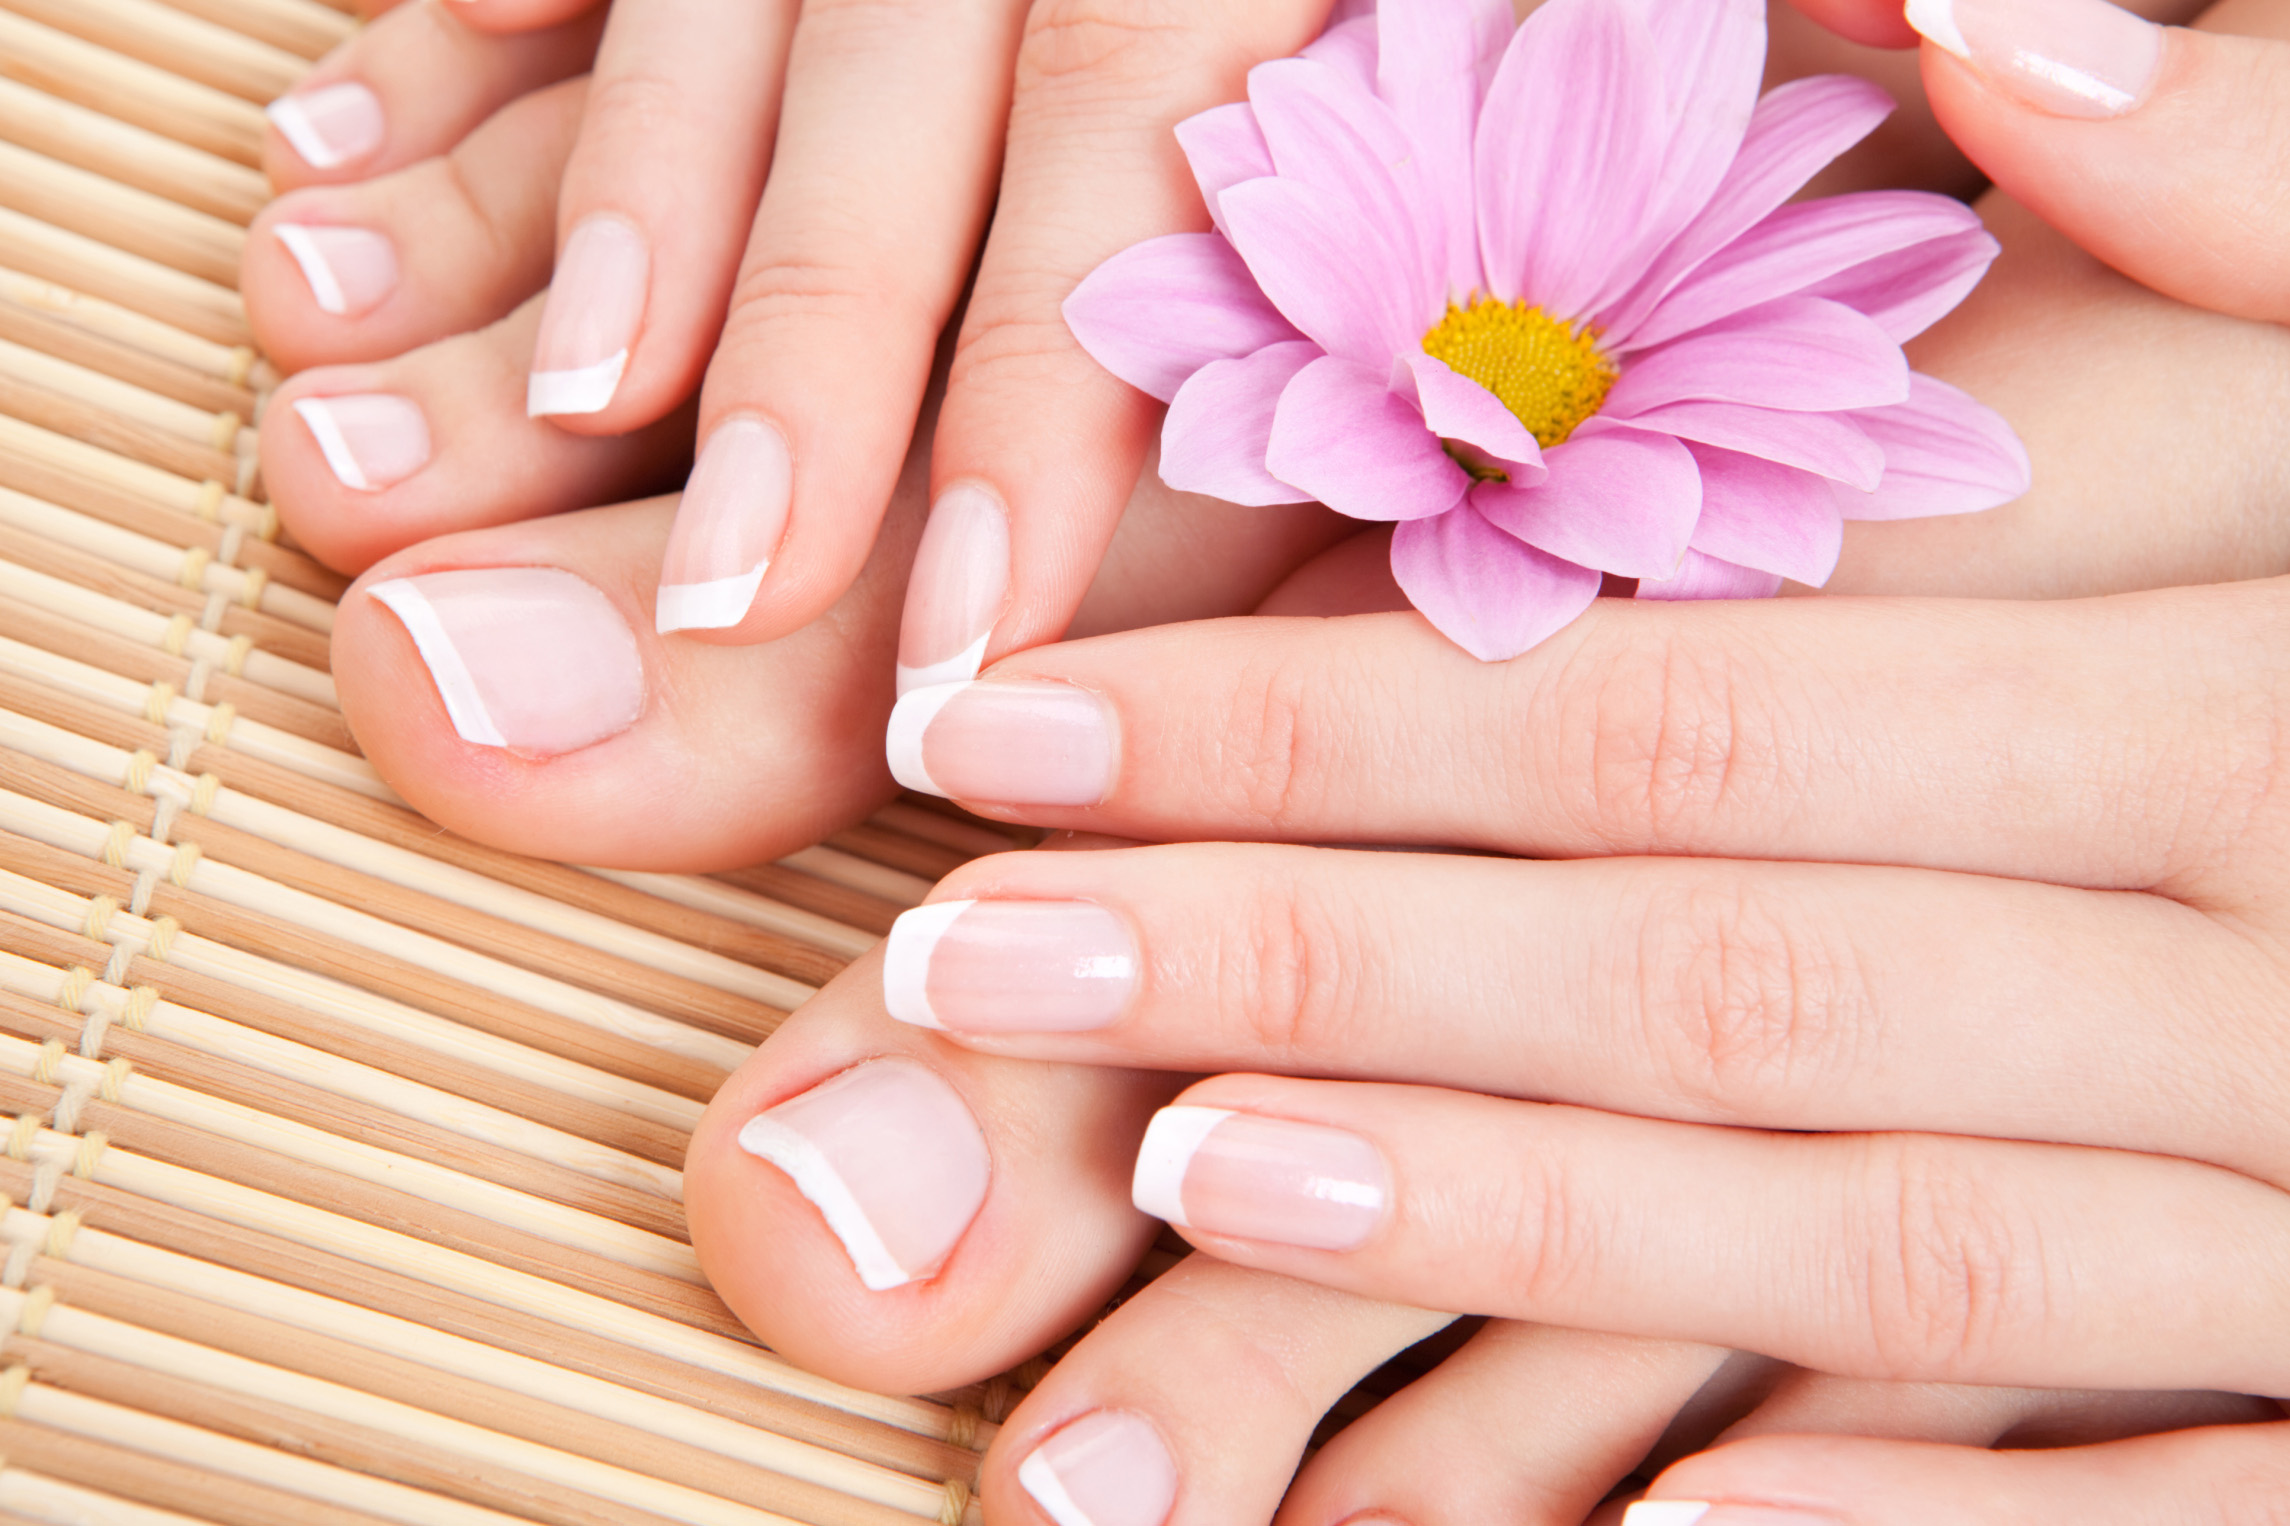 9. Natural Nail Care Remedies - wide 2